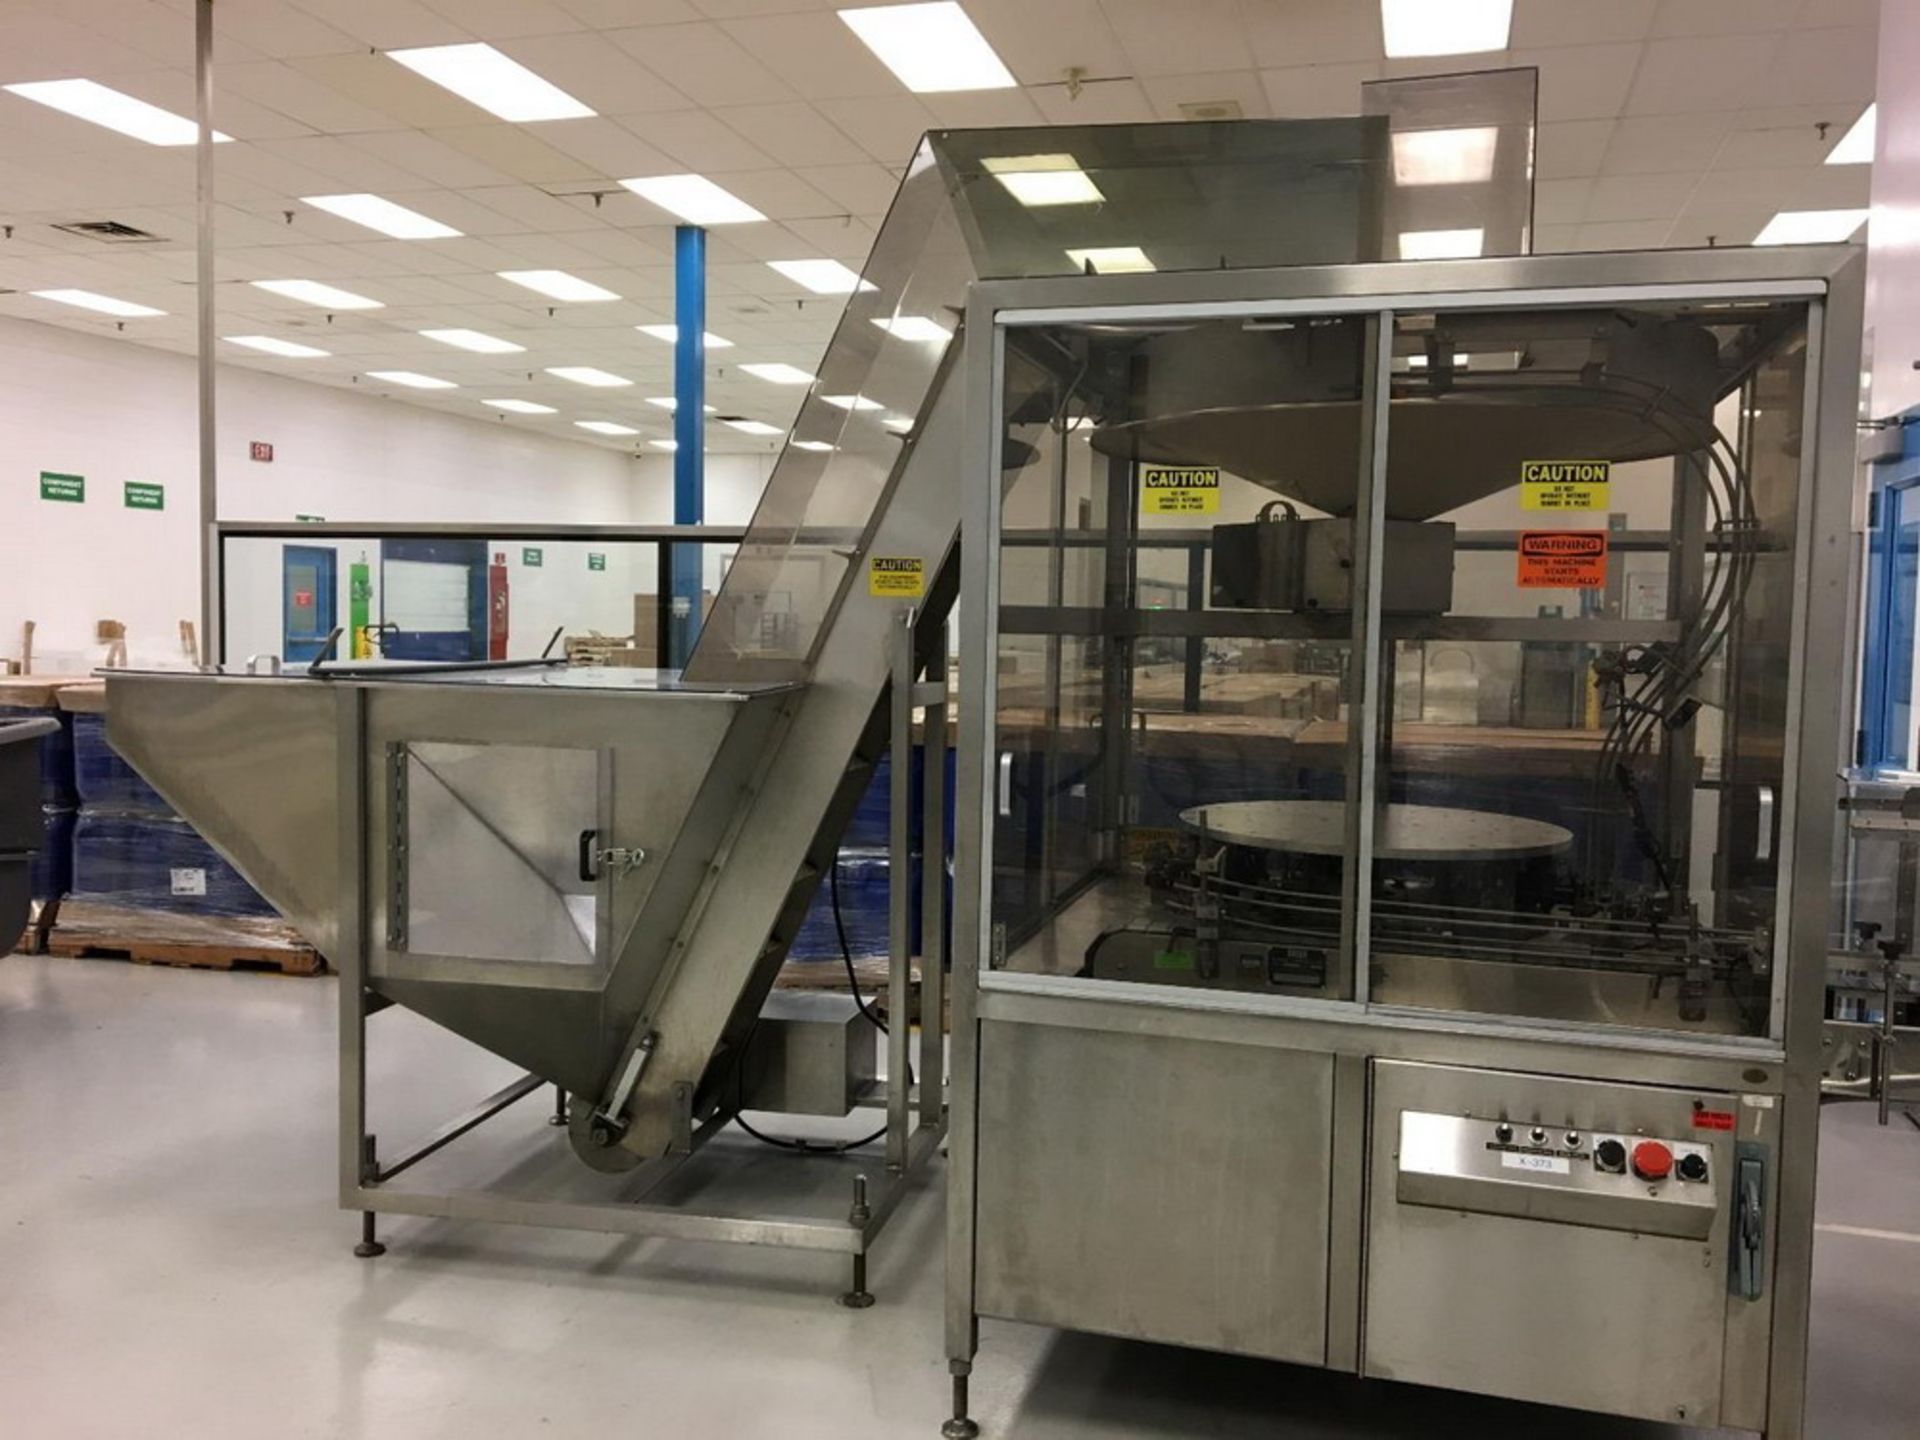 BULK LOT - Solid Dose Packaging Line. Line was installed and operational through 4/15/18.